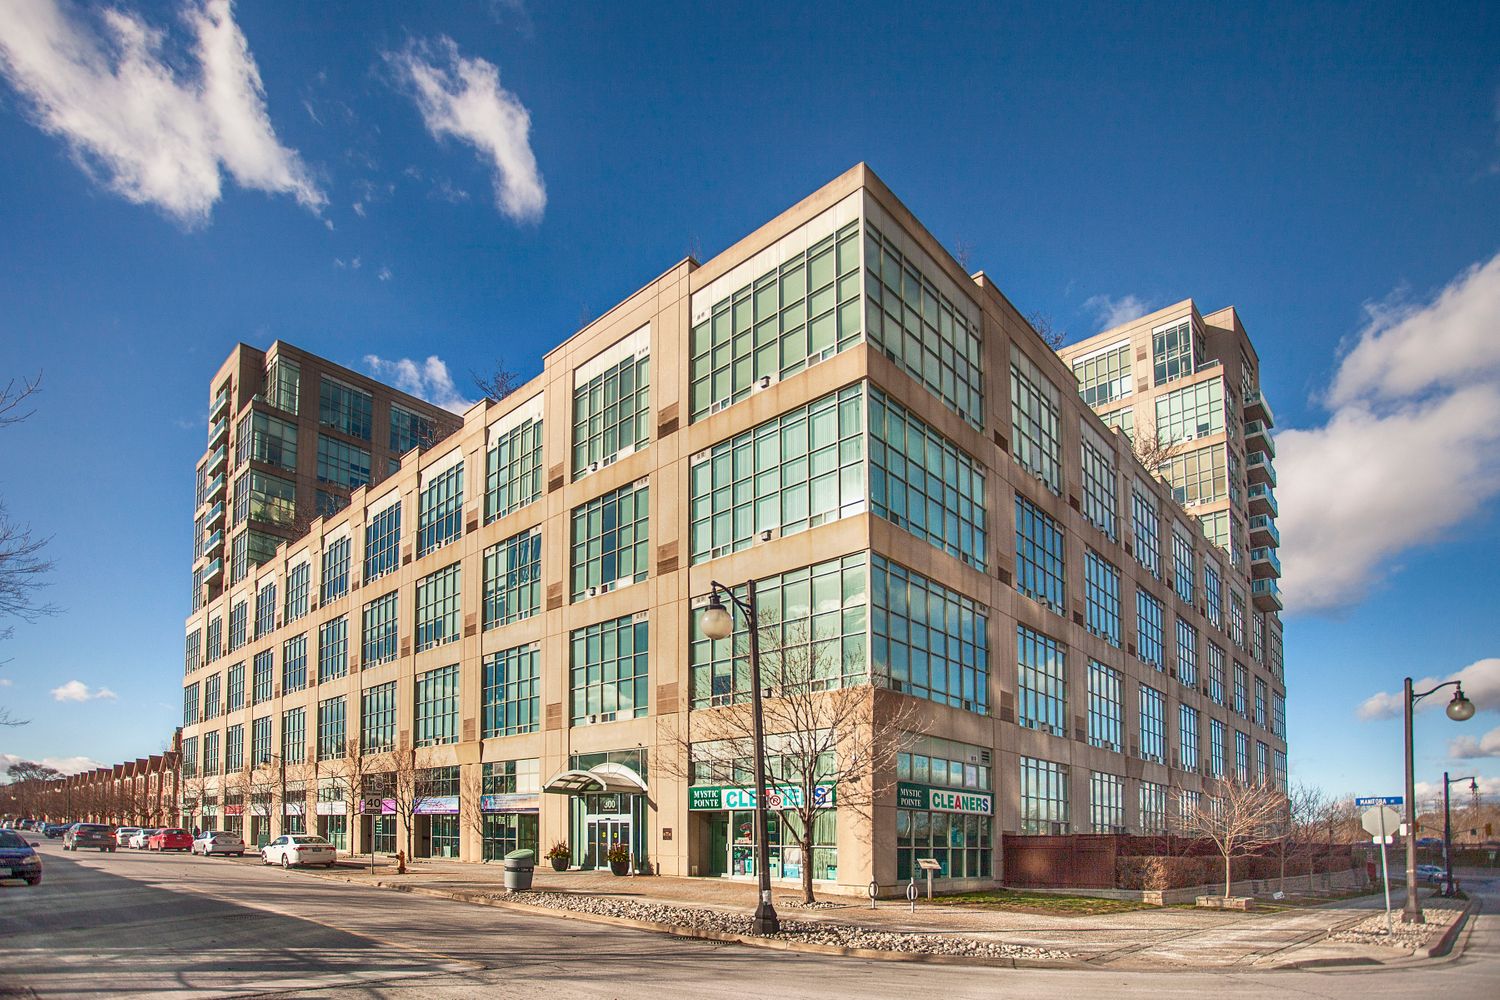 300 Manitoba Street. Warehouse Lofts at Mystic Pointe is located in  Etobicoke, Toronto - image #1 of 3